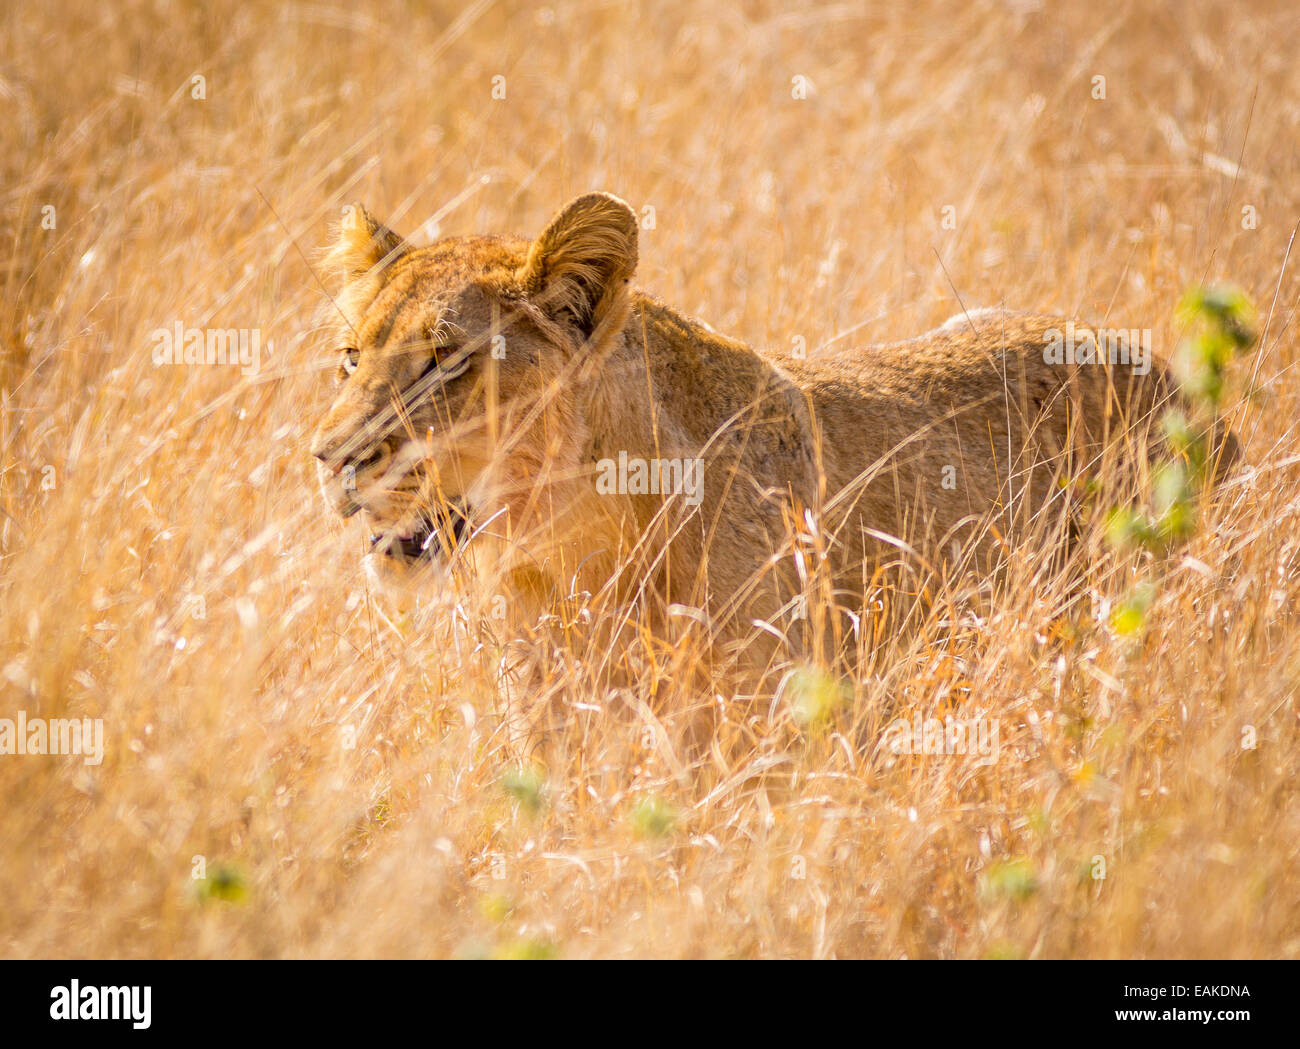 KRUGER NATIONAL PARK, SOUTH AFRICA - Young lion in tall grass. Stock Photo